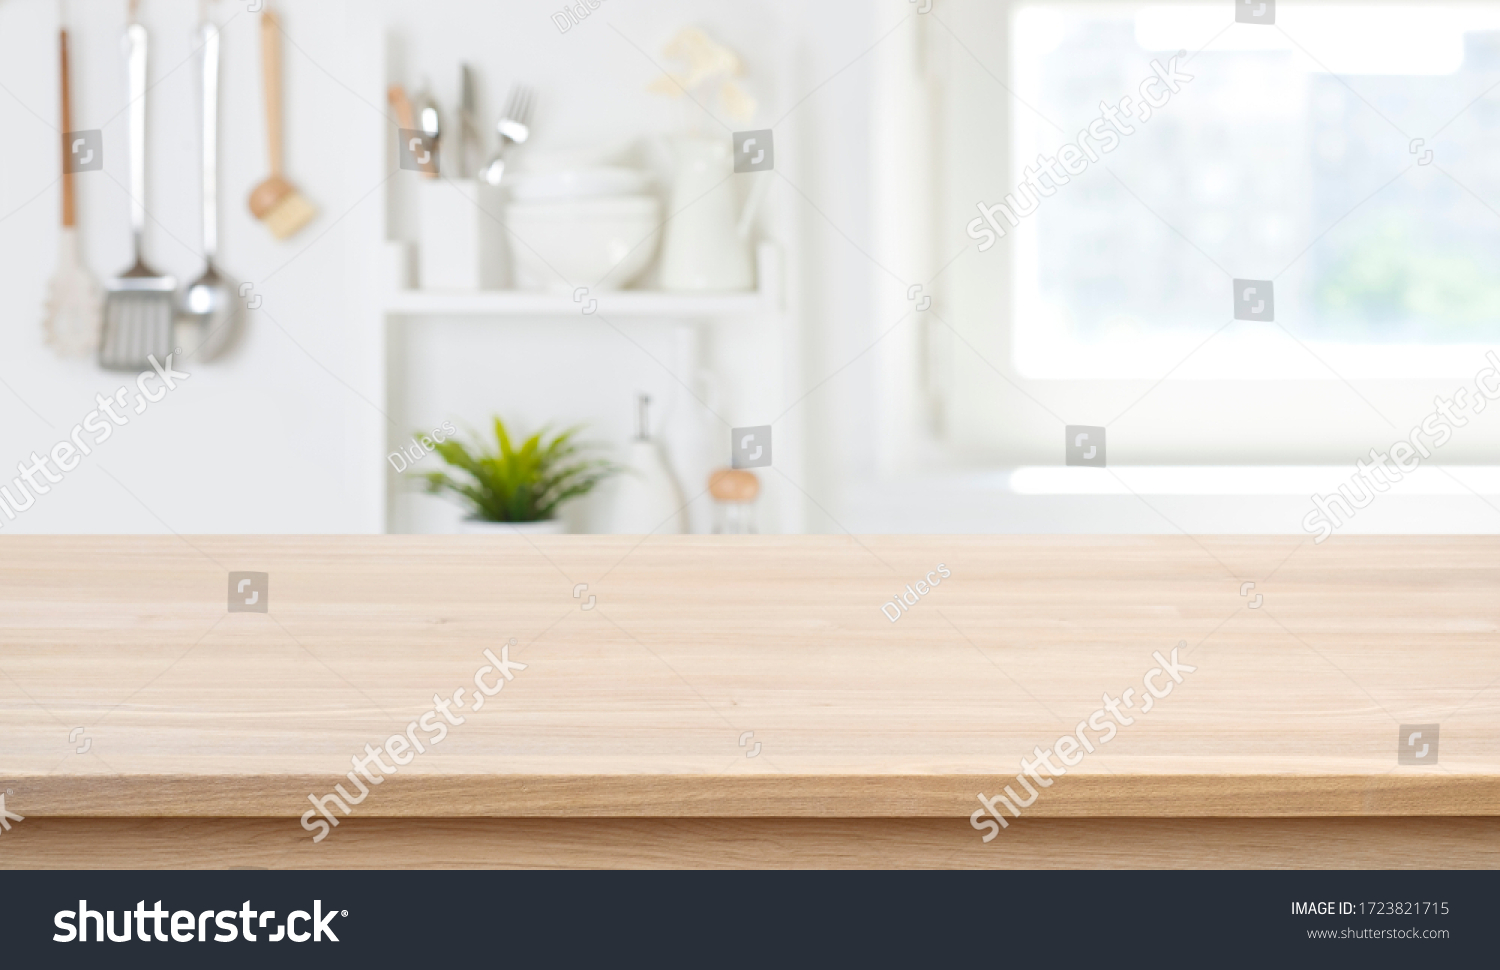 Wooden texture table top on blurred kitchen window background #1723821715